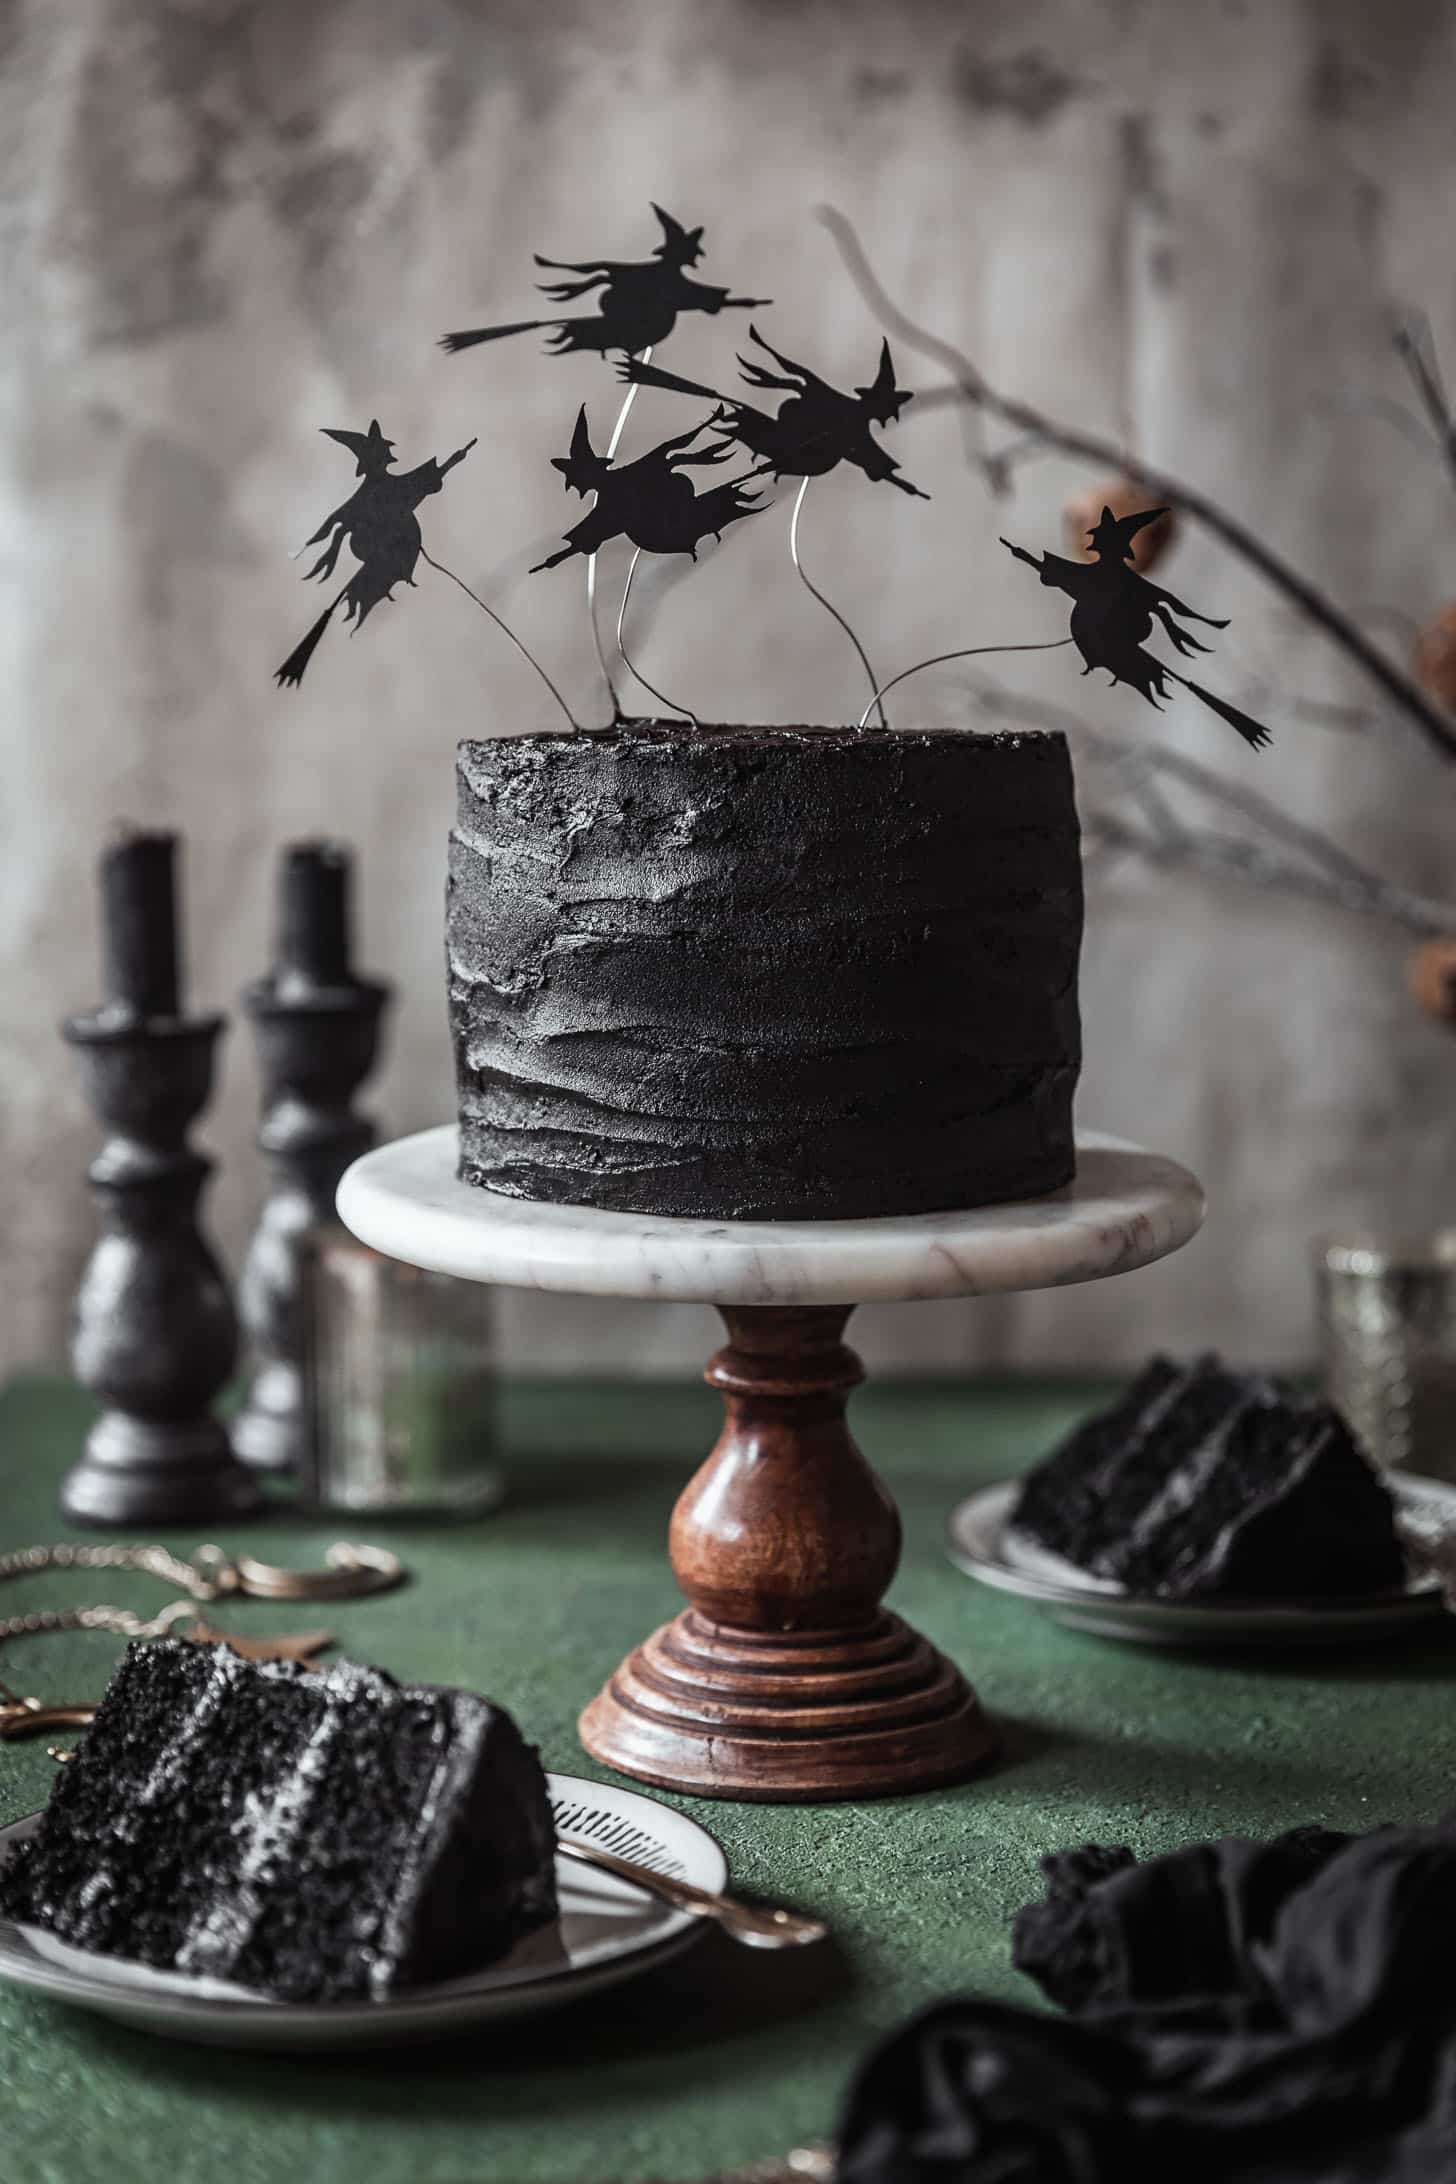 Black velvet cake with witch decorations on a marble and wood cake stand next to slices of cake and candles with a grey and dark green background.